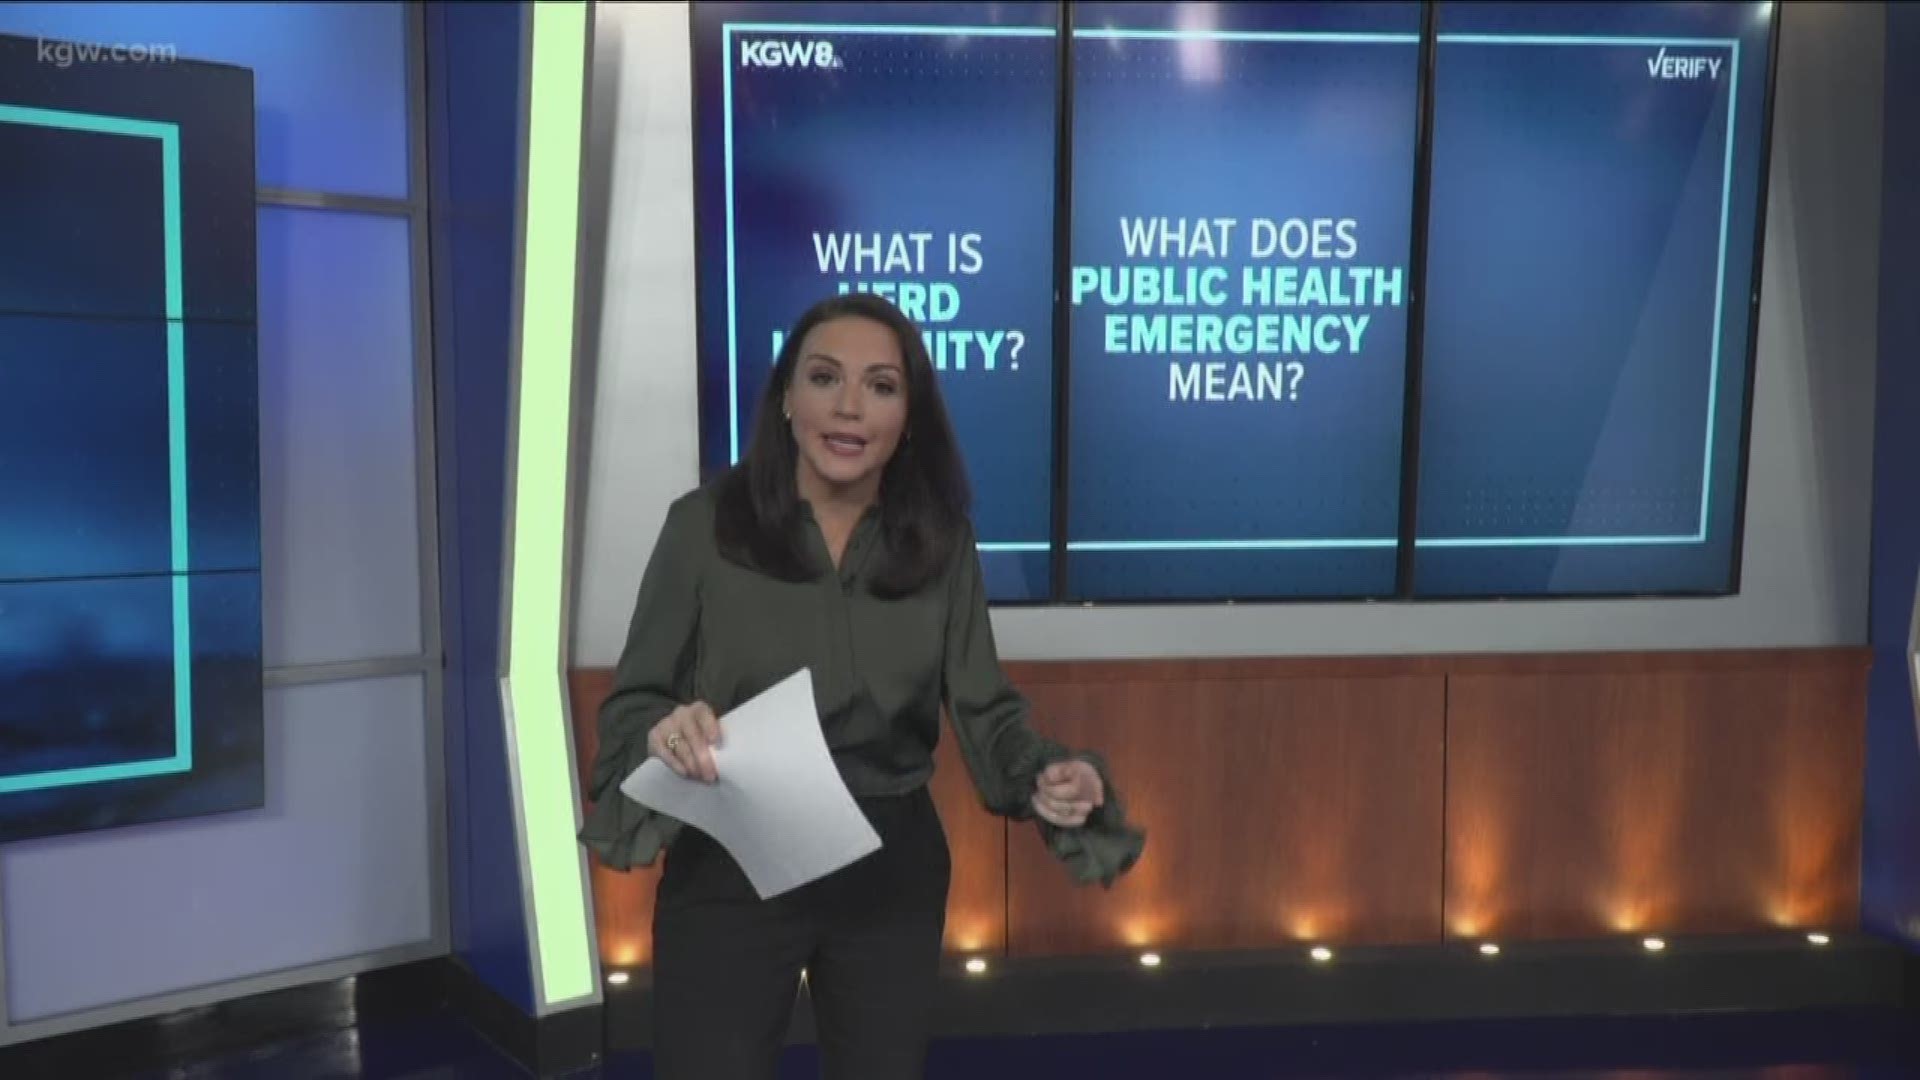 KGW's Cristin Severance verifies viewer questions about the measles outbreak in Clark County, Washington.